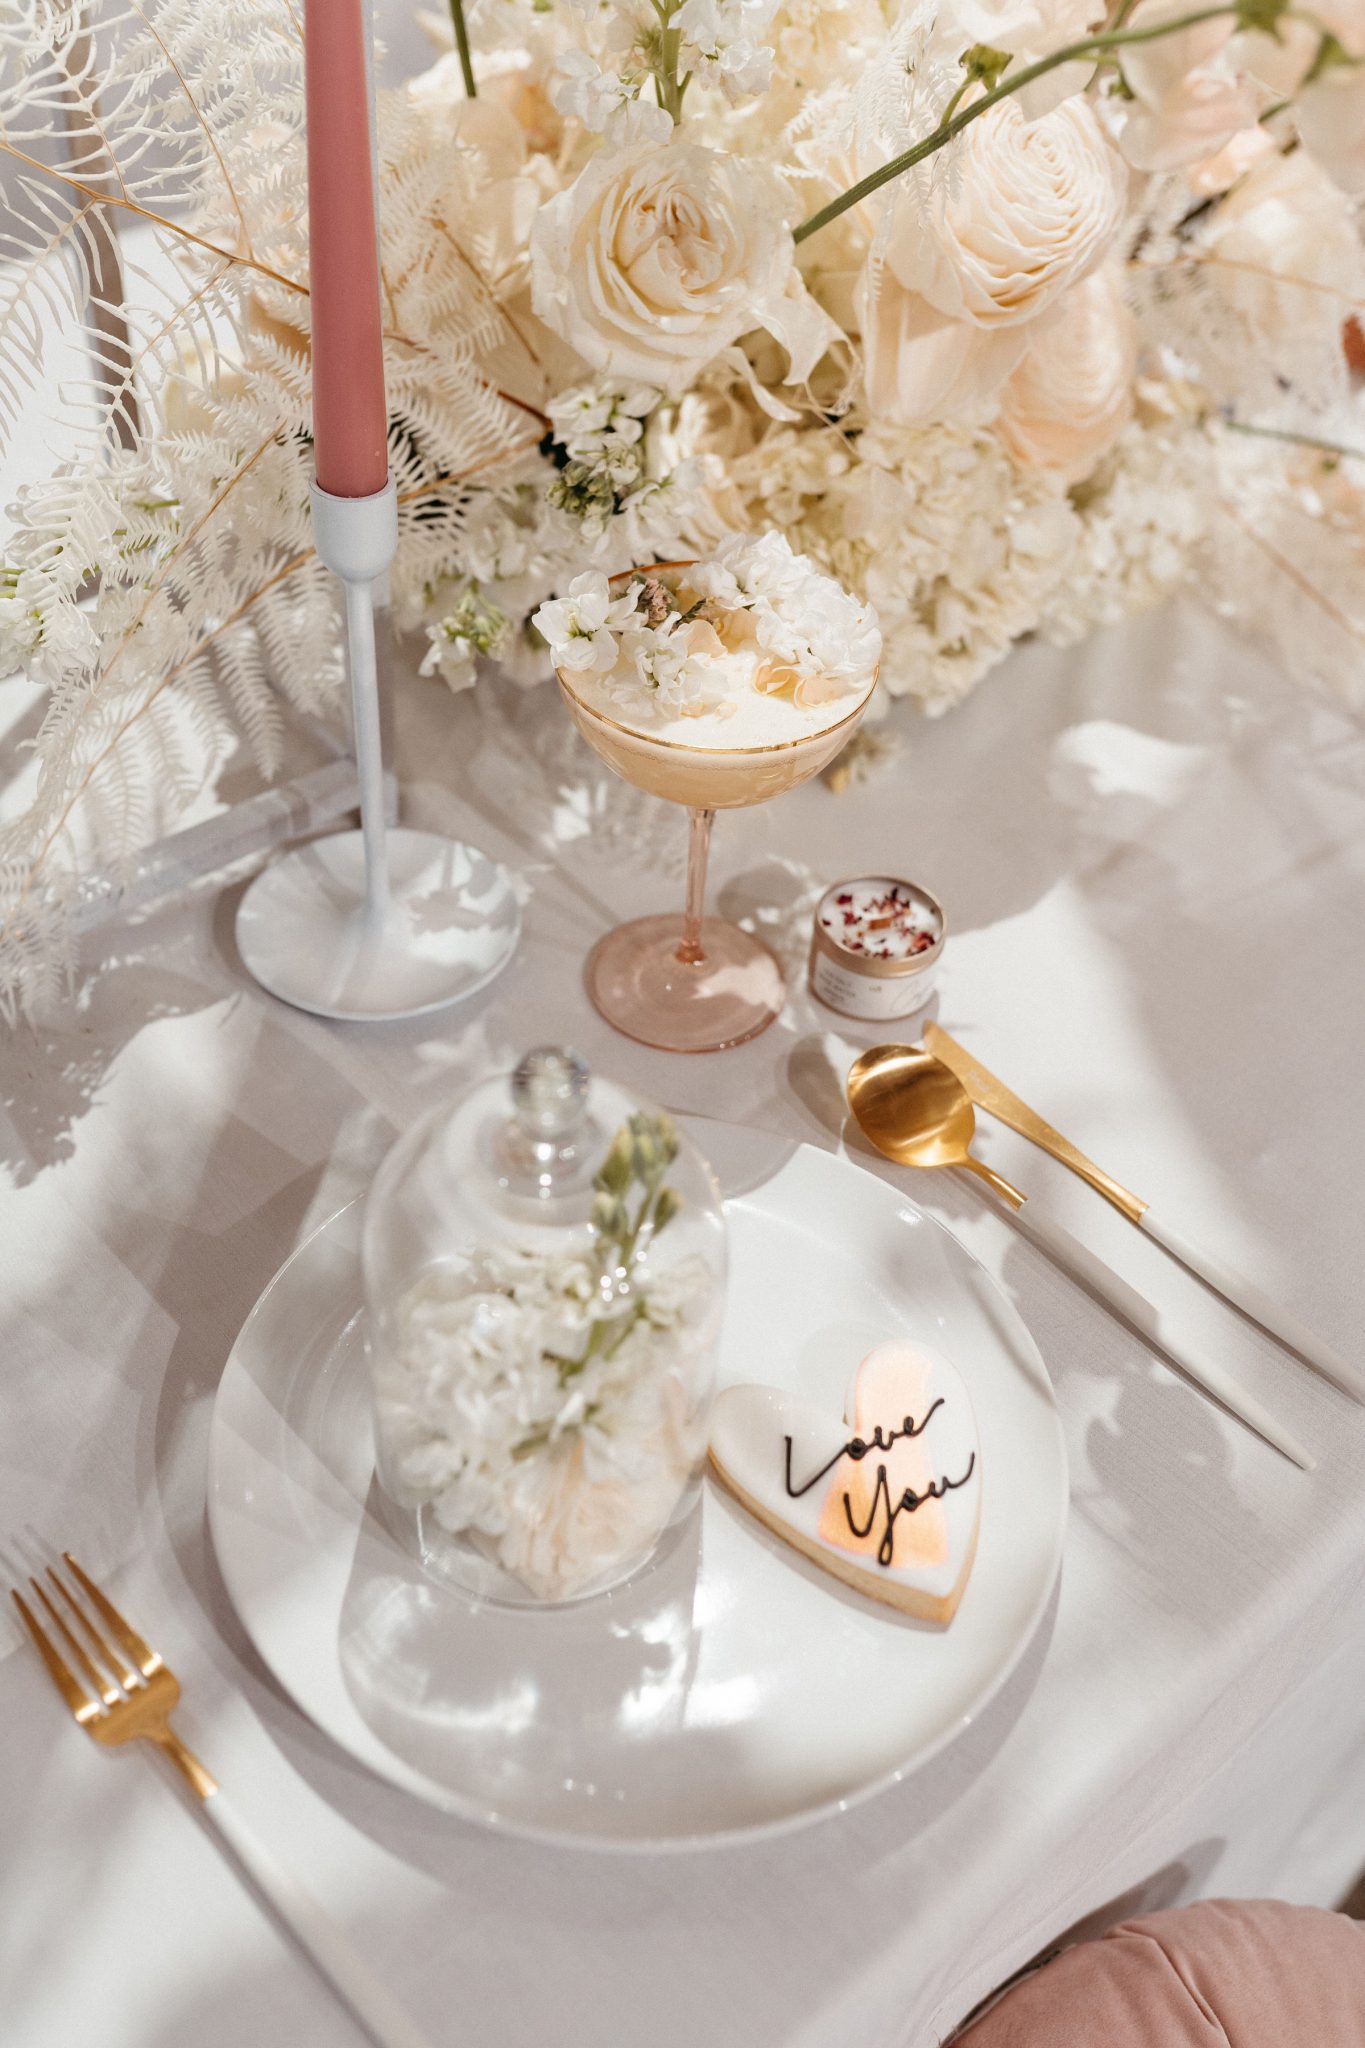 White, pink and gold wedding decor inspiration for a tablescape